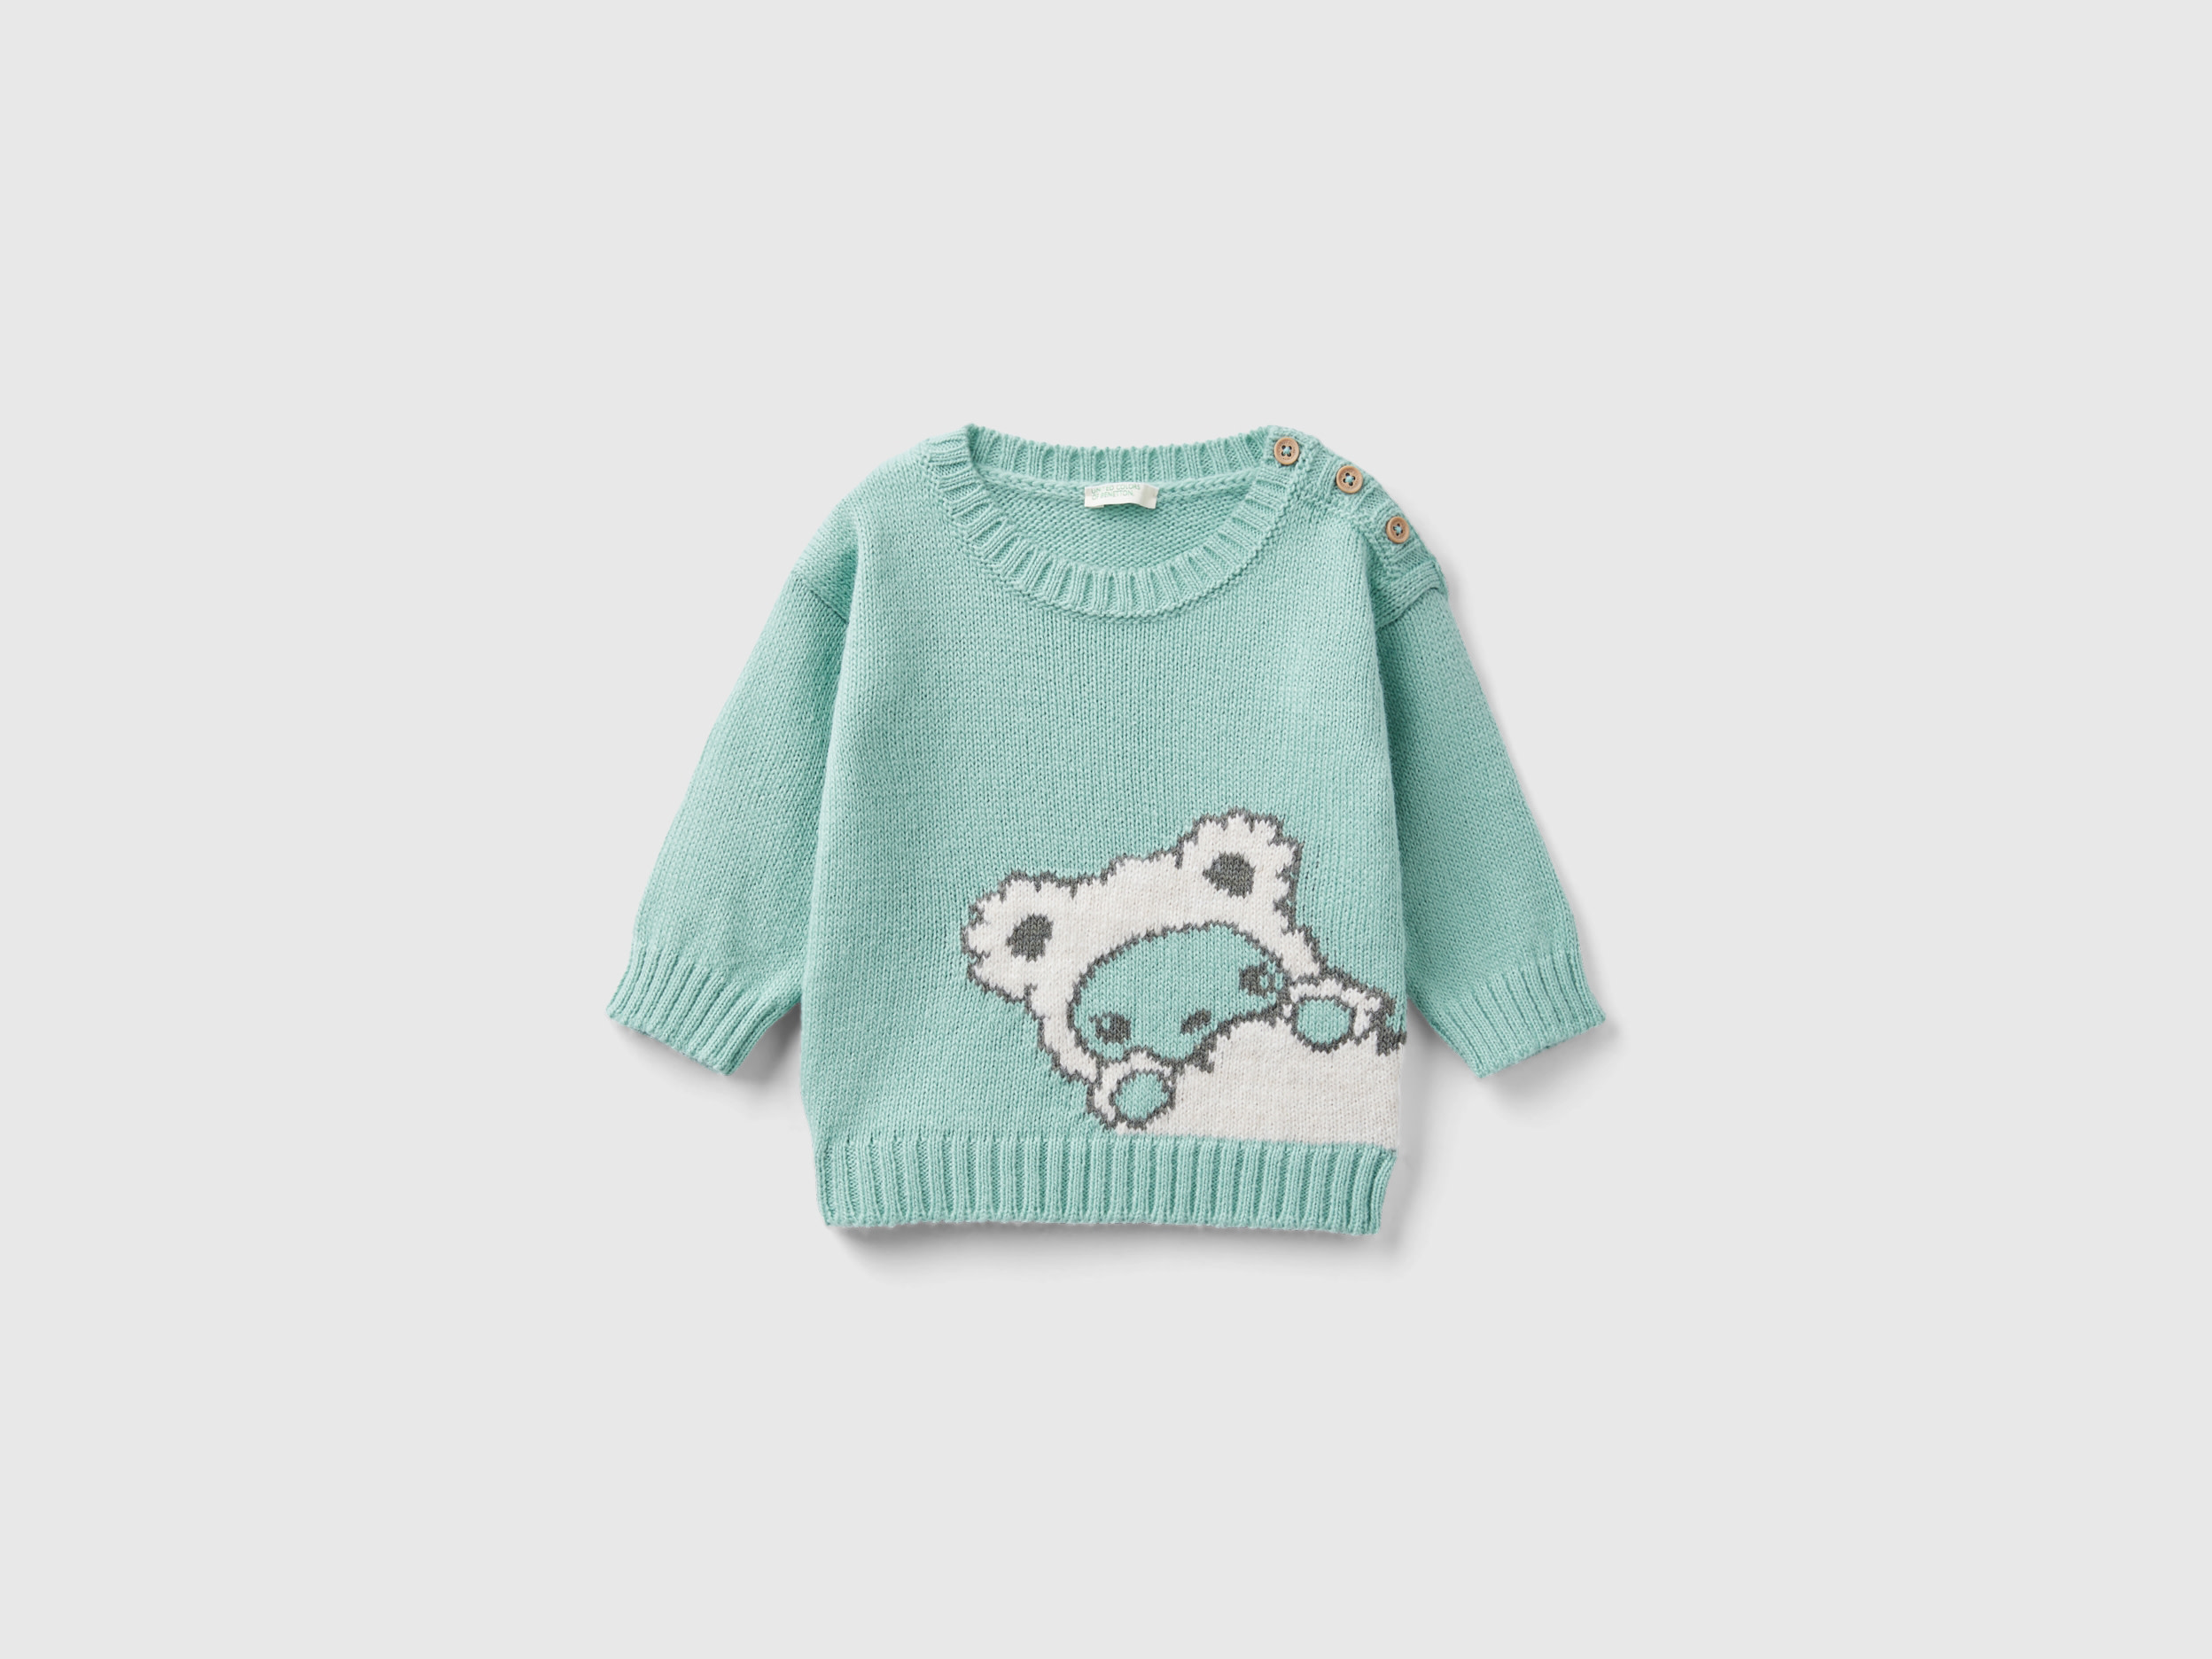 Benetton, Sweater With Inlay, size 9-12, Green, Kids